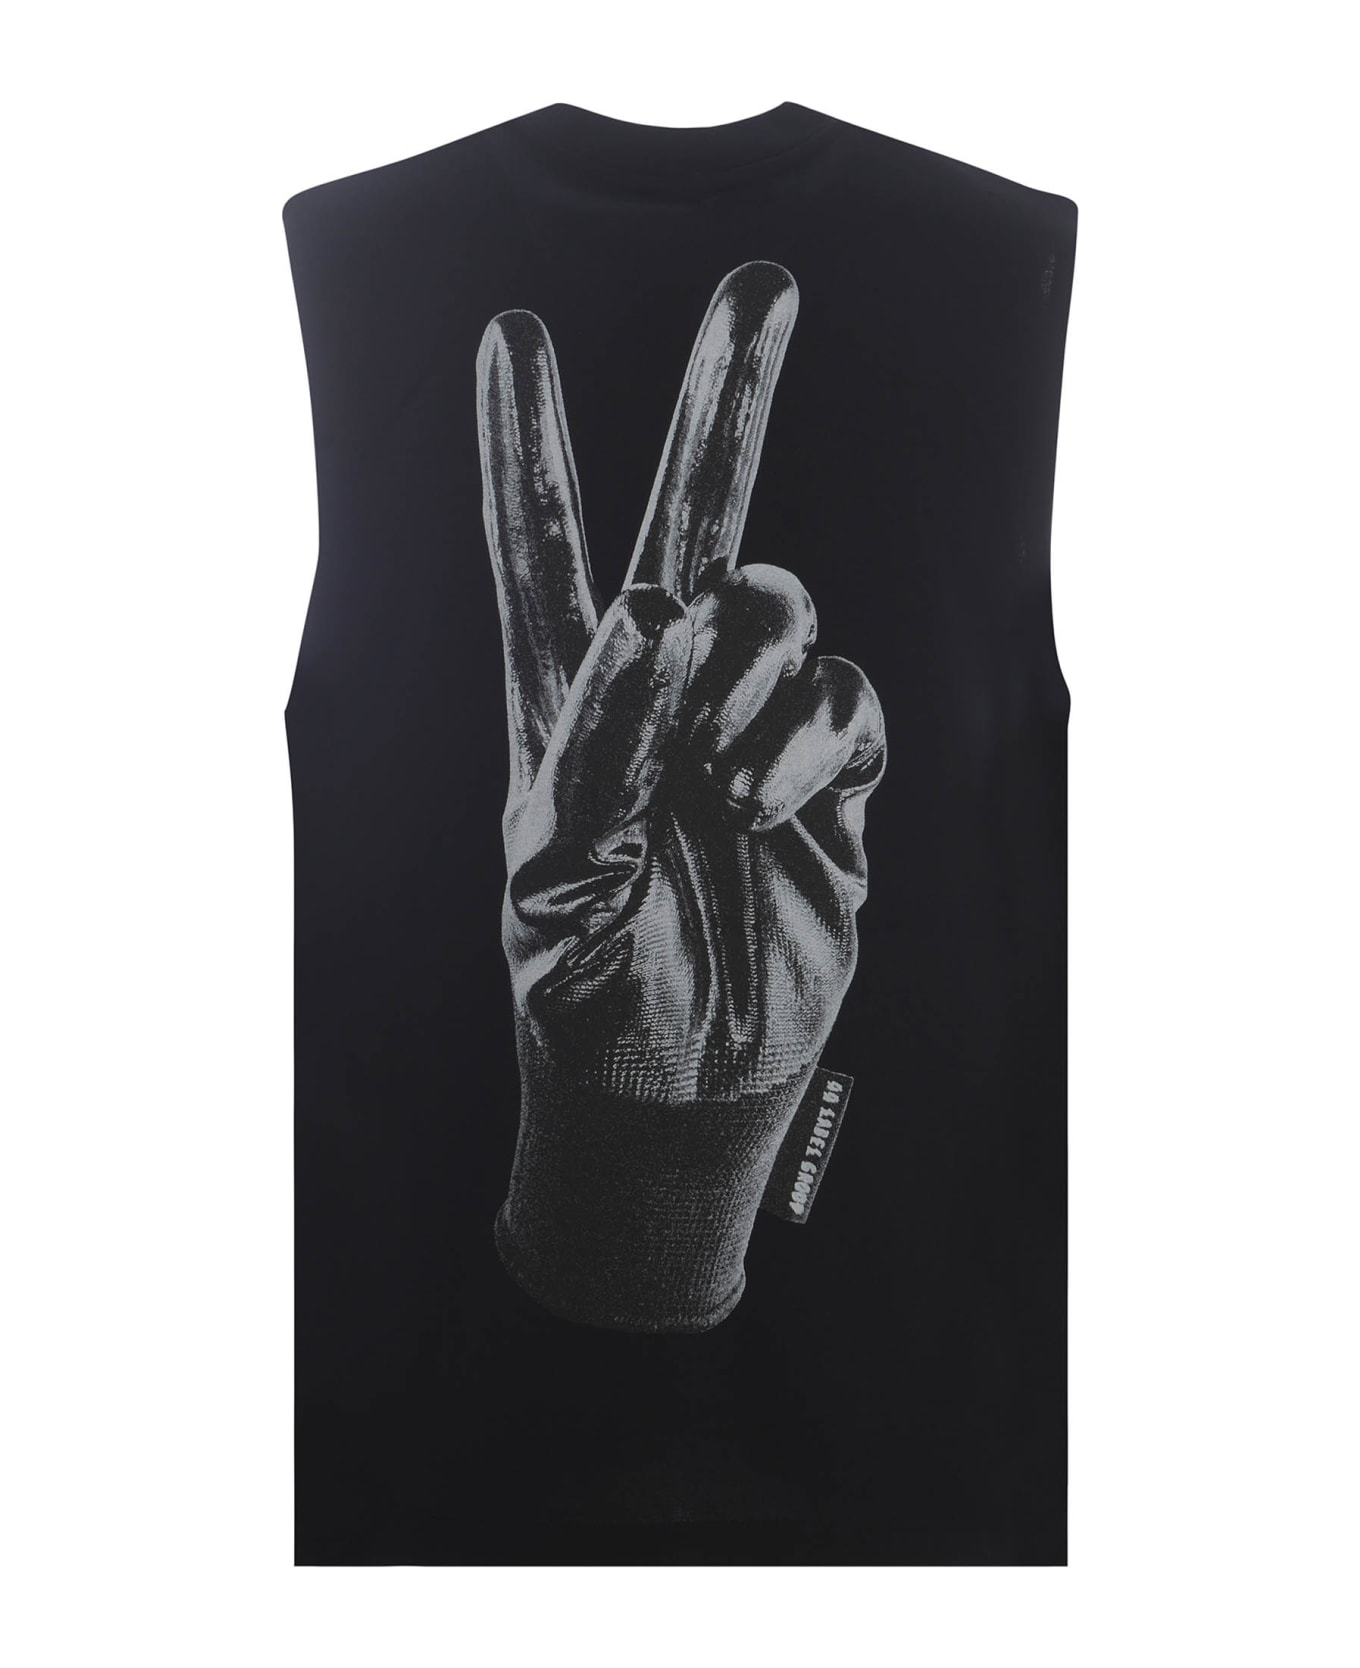 44 Label Group Tank Top 44label Group "peace" Made Of Cotton - Nero